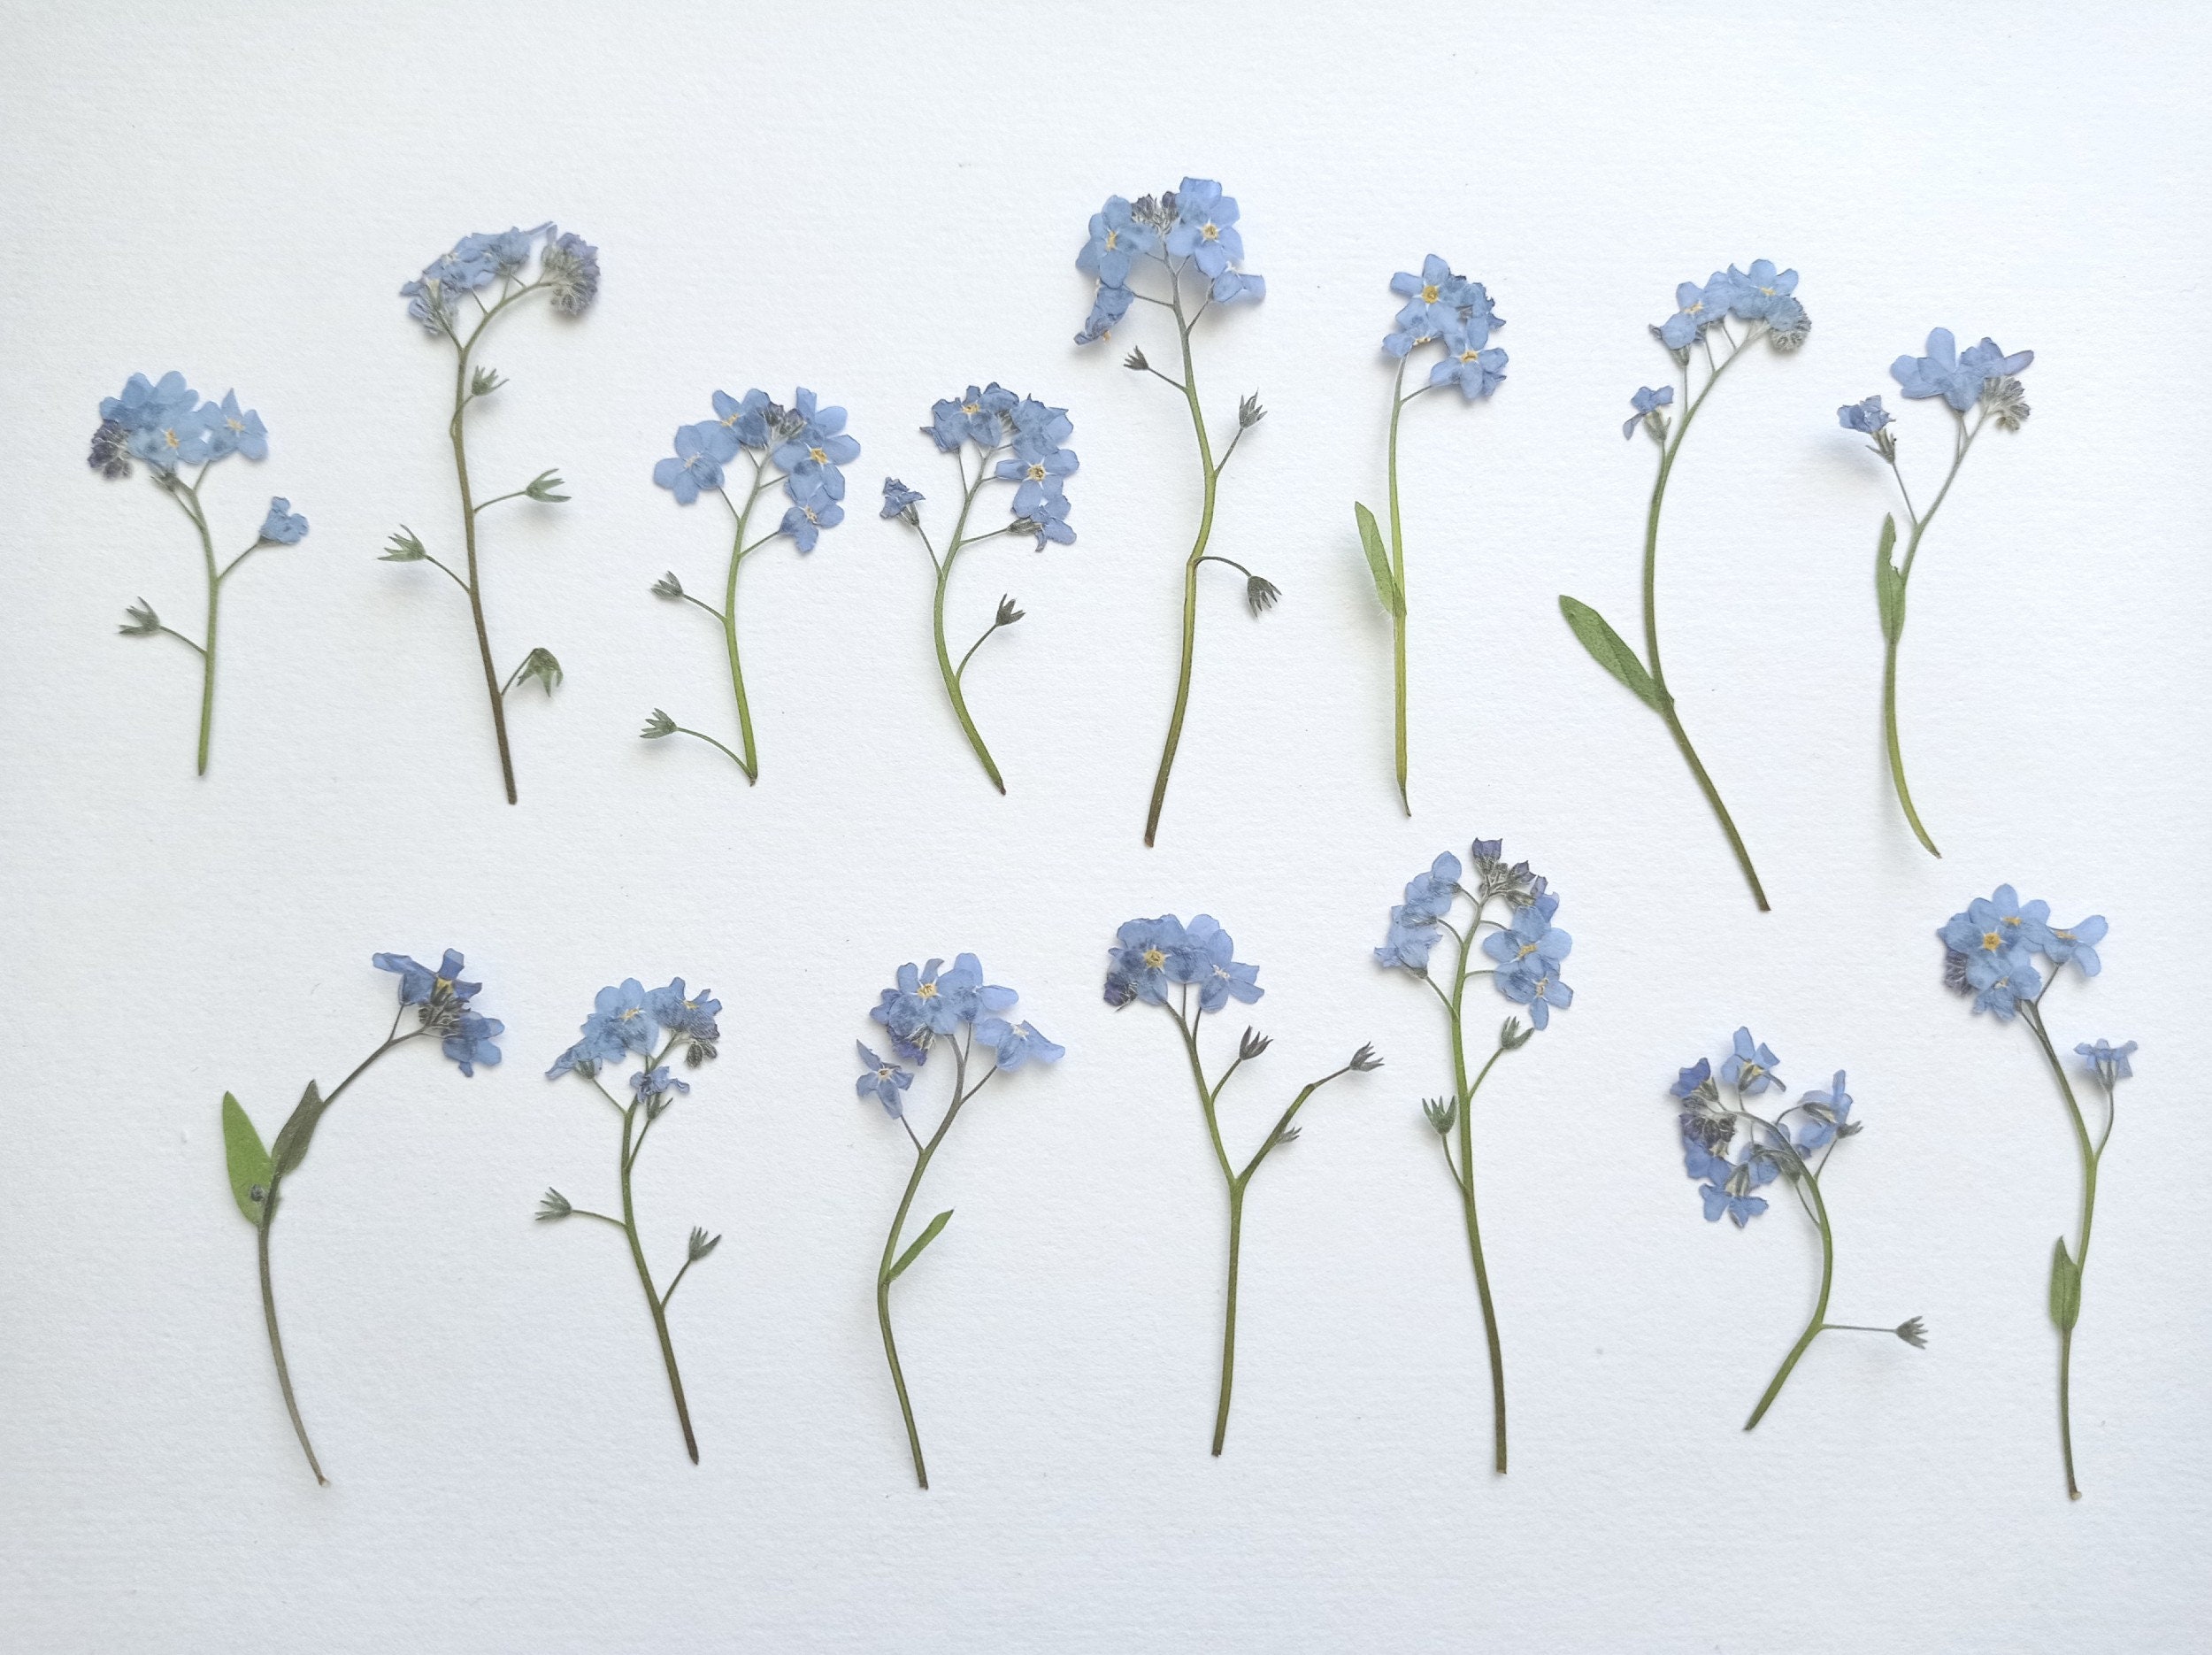  Mini Dried Pressed Baby's Breath Flowers - 100% Natural Flat  Real White Gypsophila Baby Breath Bulk, Pressed Flowers for Resin, Frame  Art, Scrapbooking, Wedding Invitation (Blue)